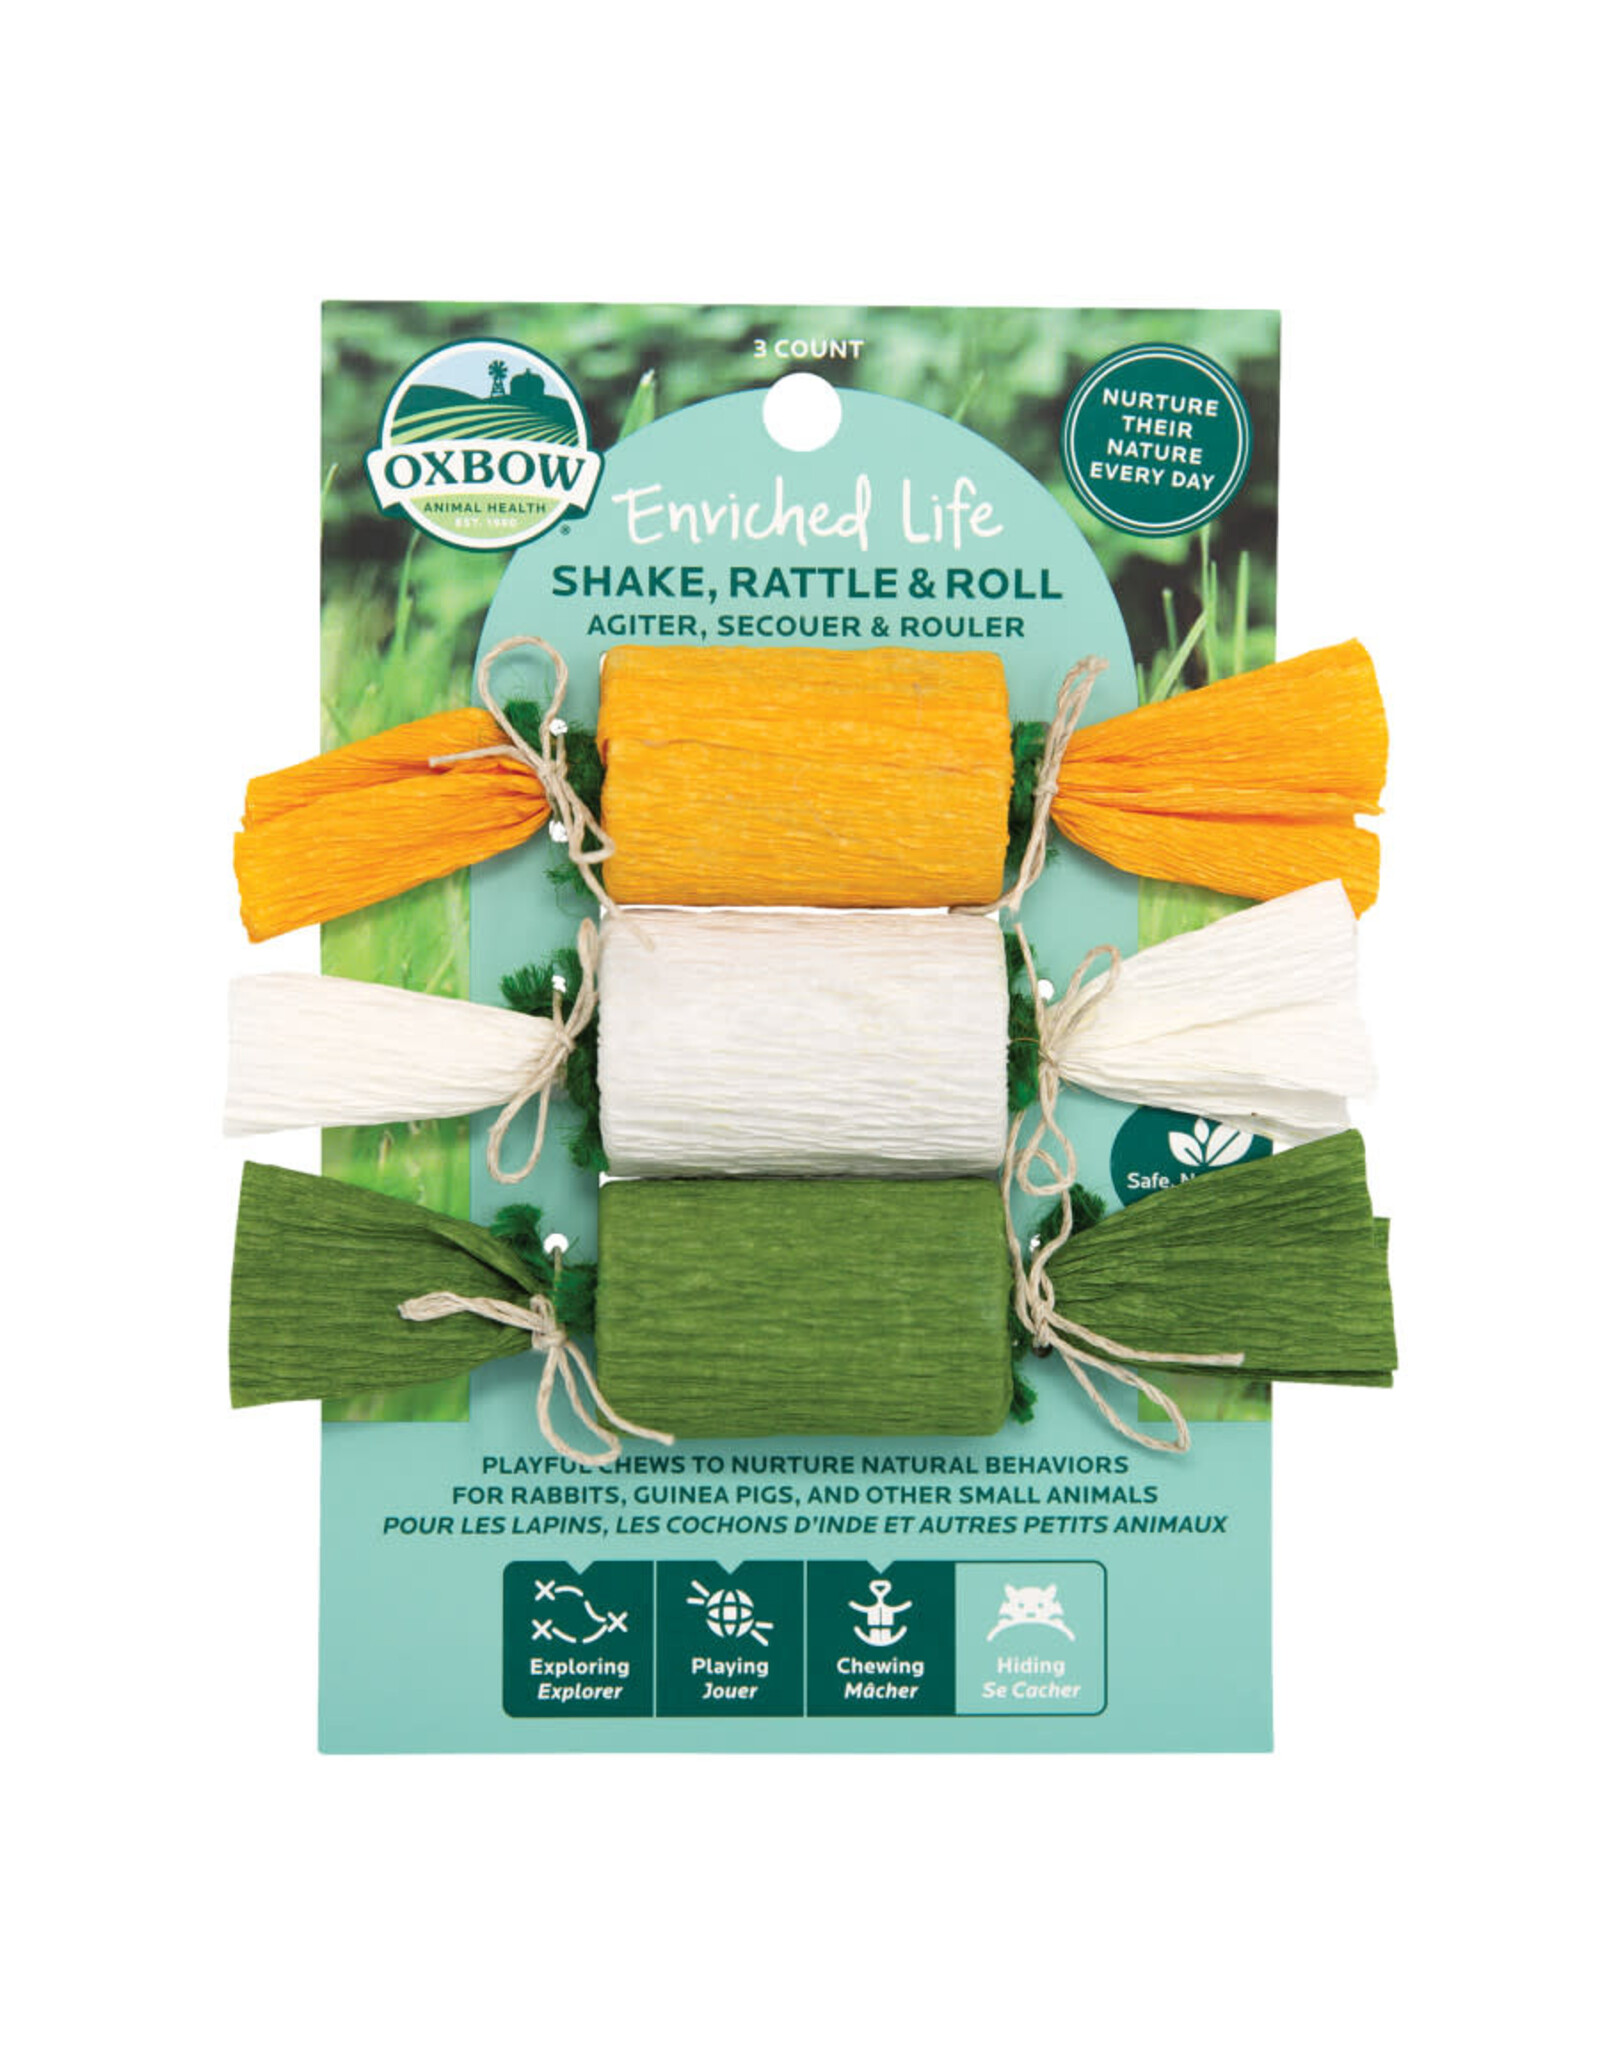 Oxbow Animal Health OXBOW ENRICHED LIFE SHAKE, RATTLE & ROLL SMALL ANIMAL CHEW TOY